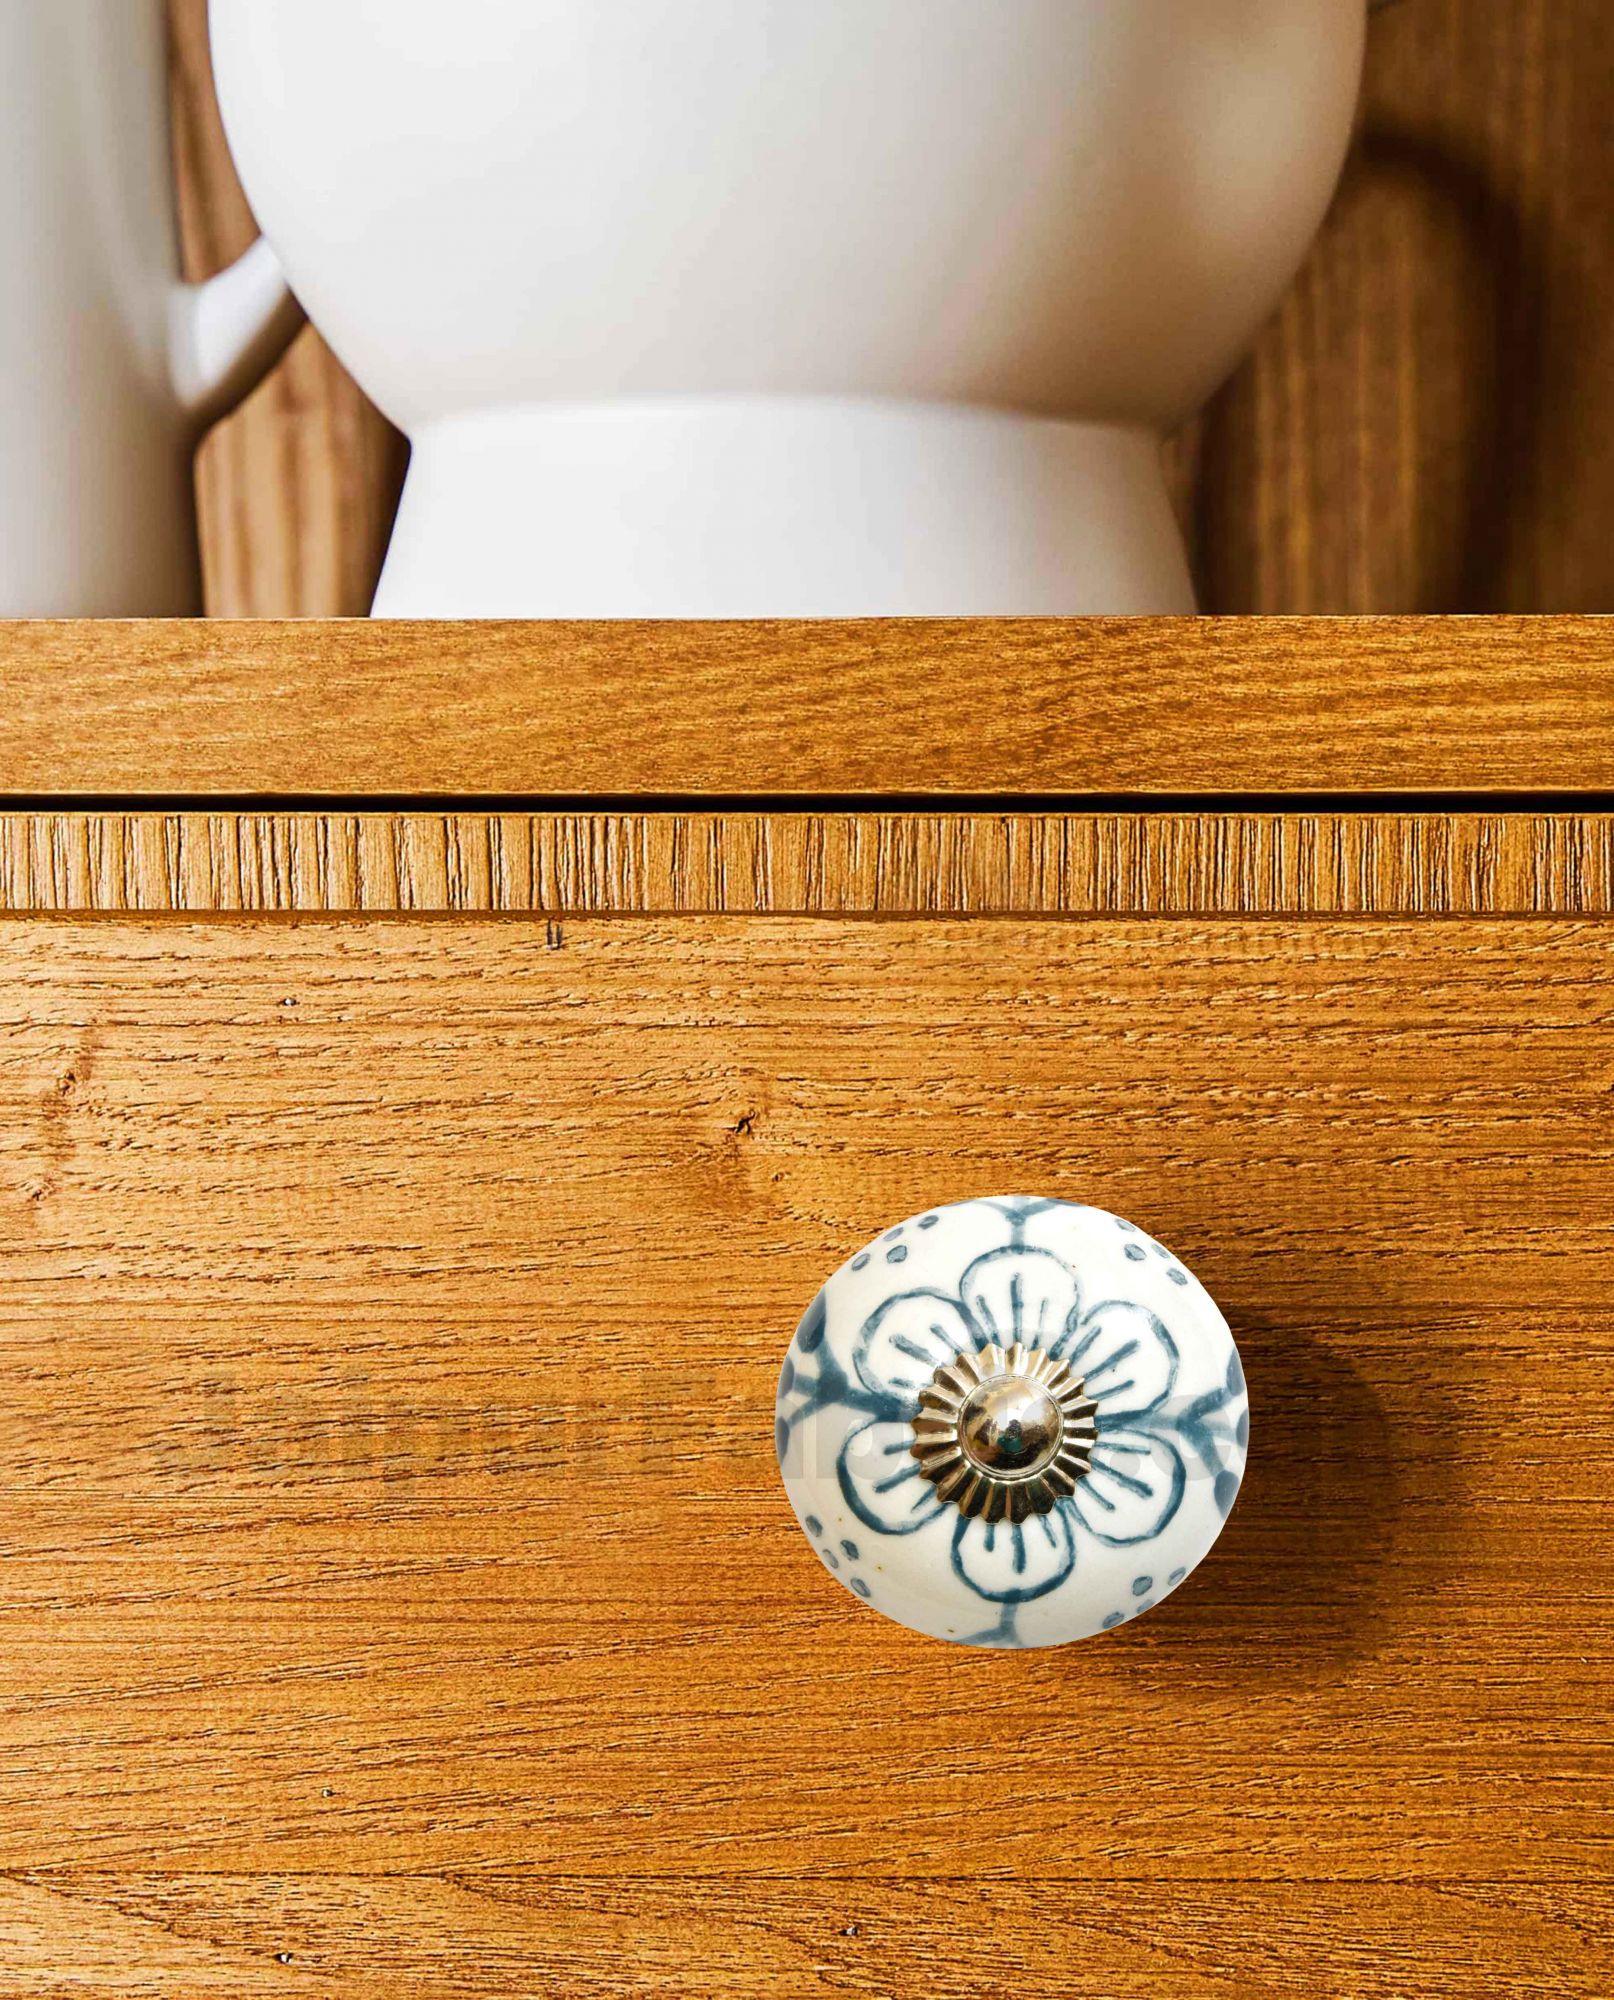 English Ceramic Knob Set of 25 Pcs Fabricated Knobs for Doors and Cabinets with Brass Blue Pottery